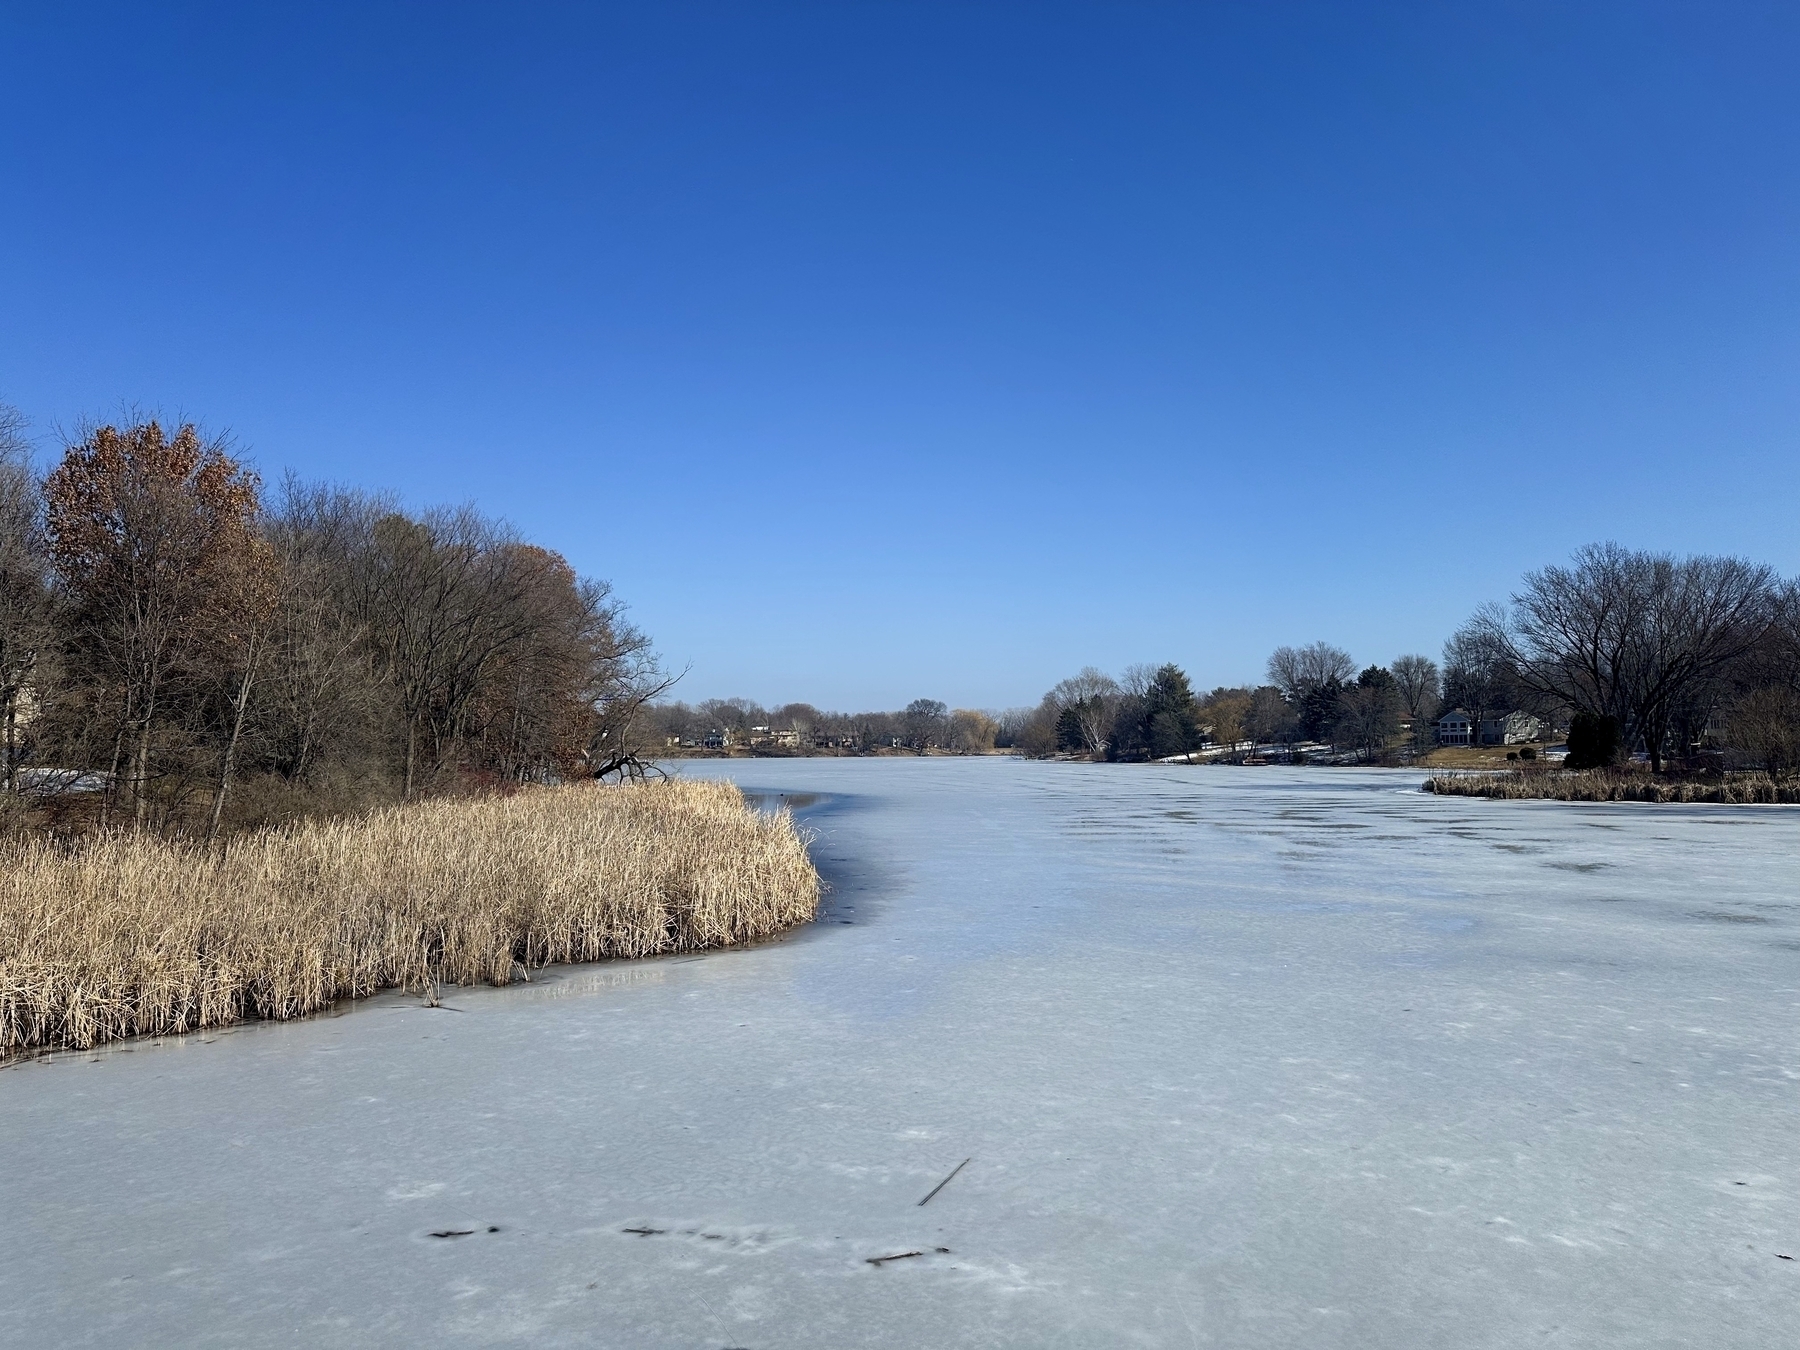 A frozen river edged by dry reeds and leafless trees, under a clear blue sky, with houses visible in the distance.